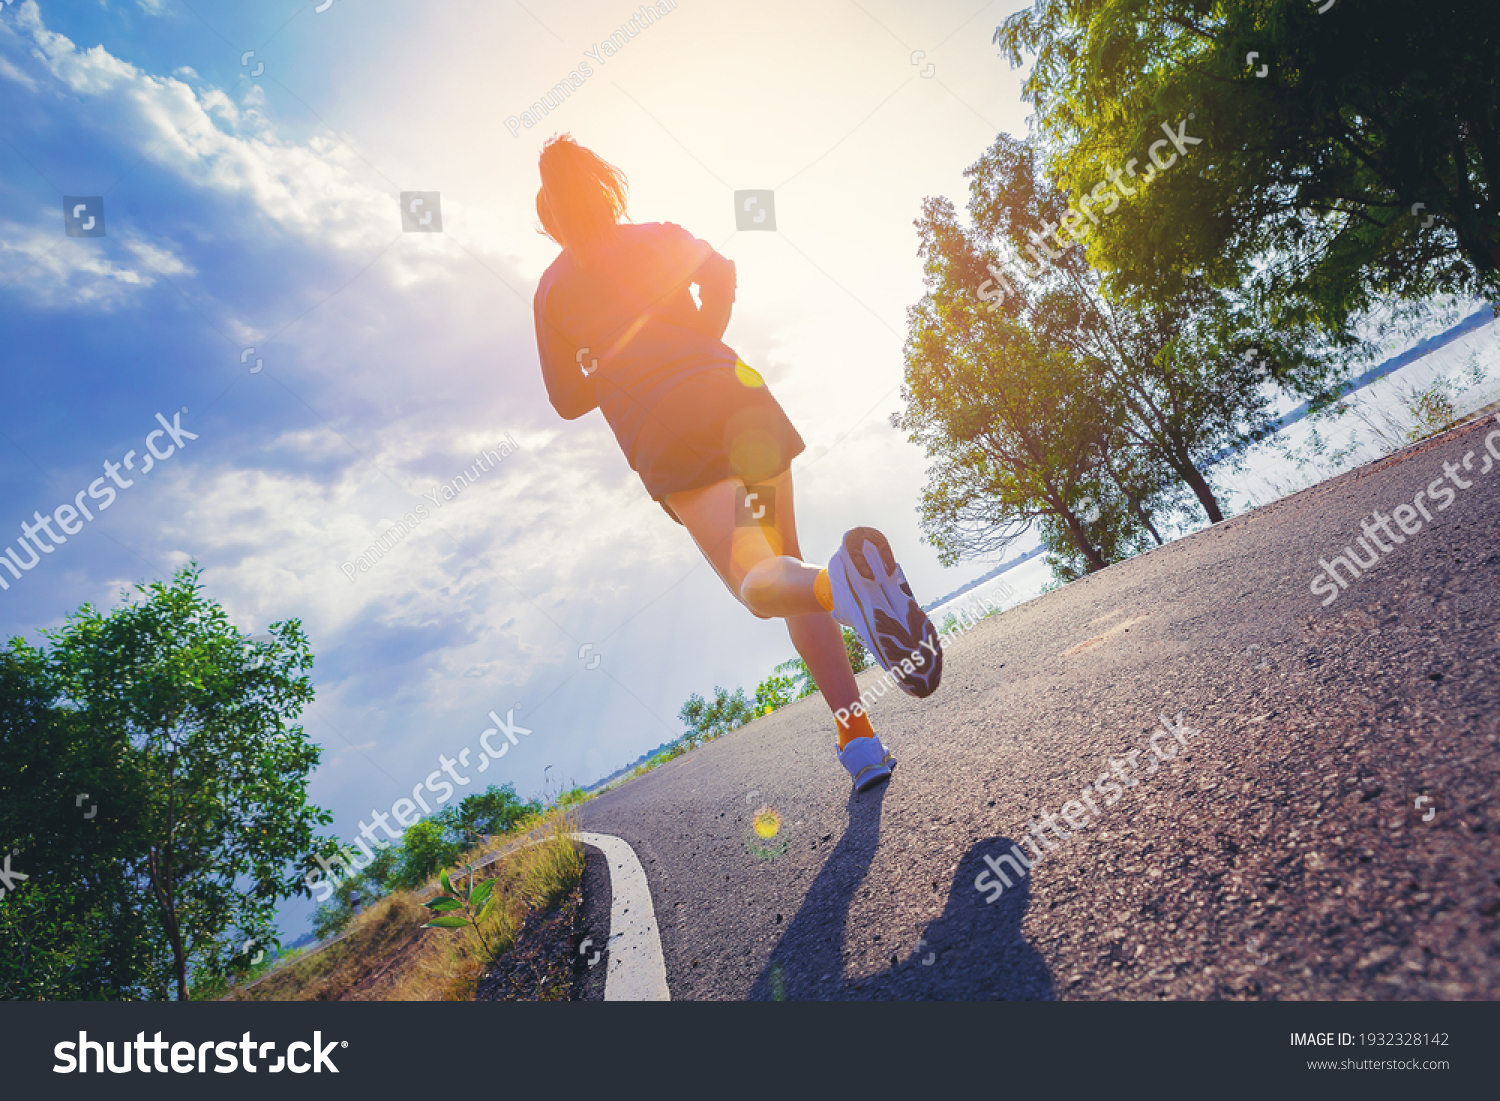 Young woman running sprinting on road. Fit runner fitness runner during outdoor workout with sunset background. #1932328142